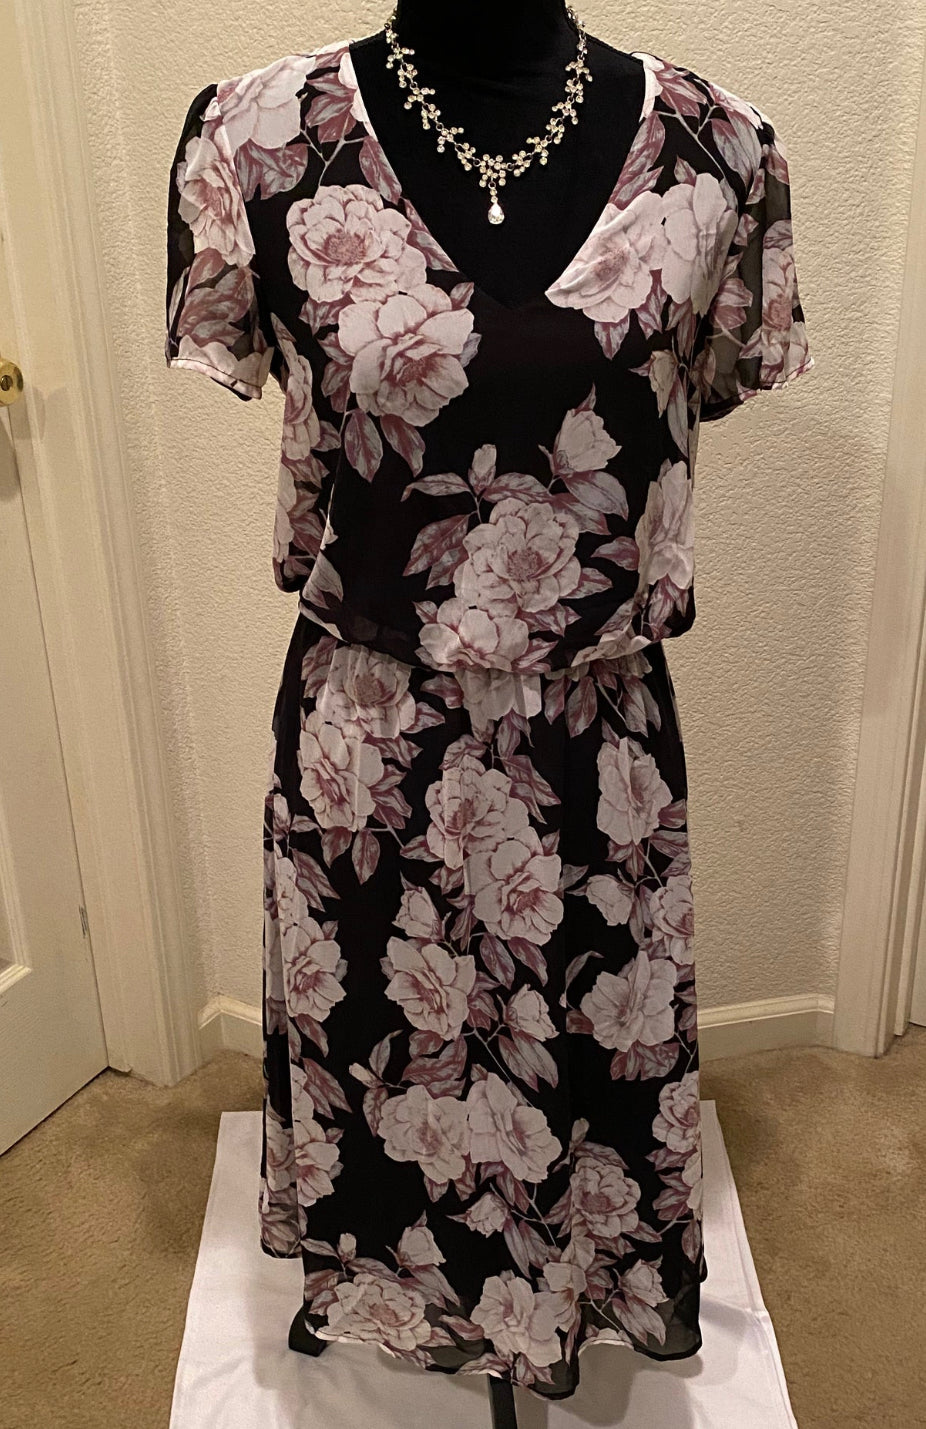 Connected Apparel Floral Dress, US Size 8 - NEW